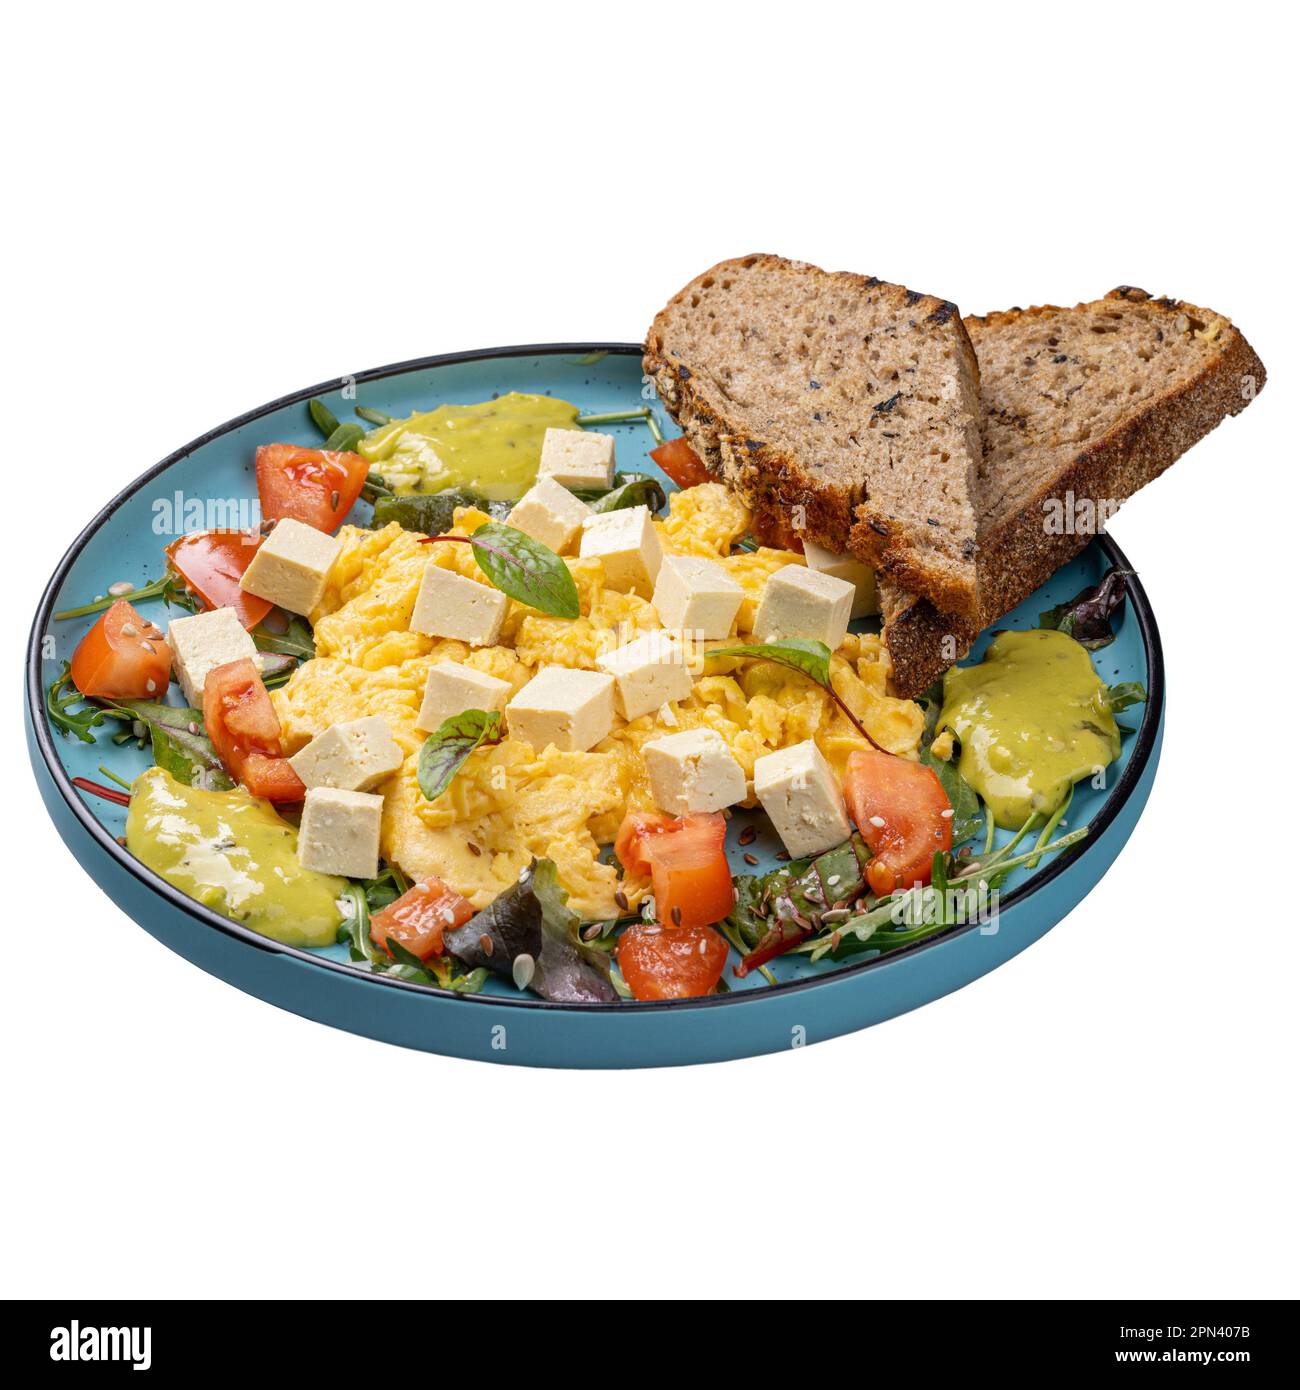 Restaurant breakfast menu concept, scrambled eggs with tofu, tomatoes and guacamole Stock Photo